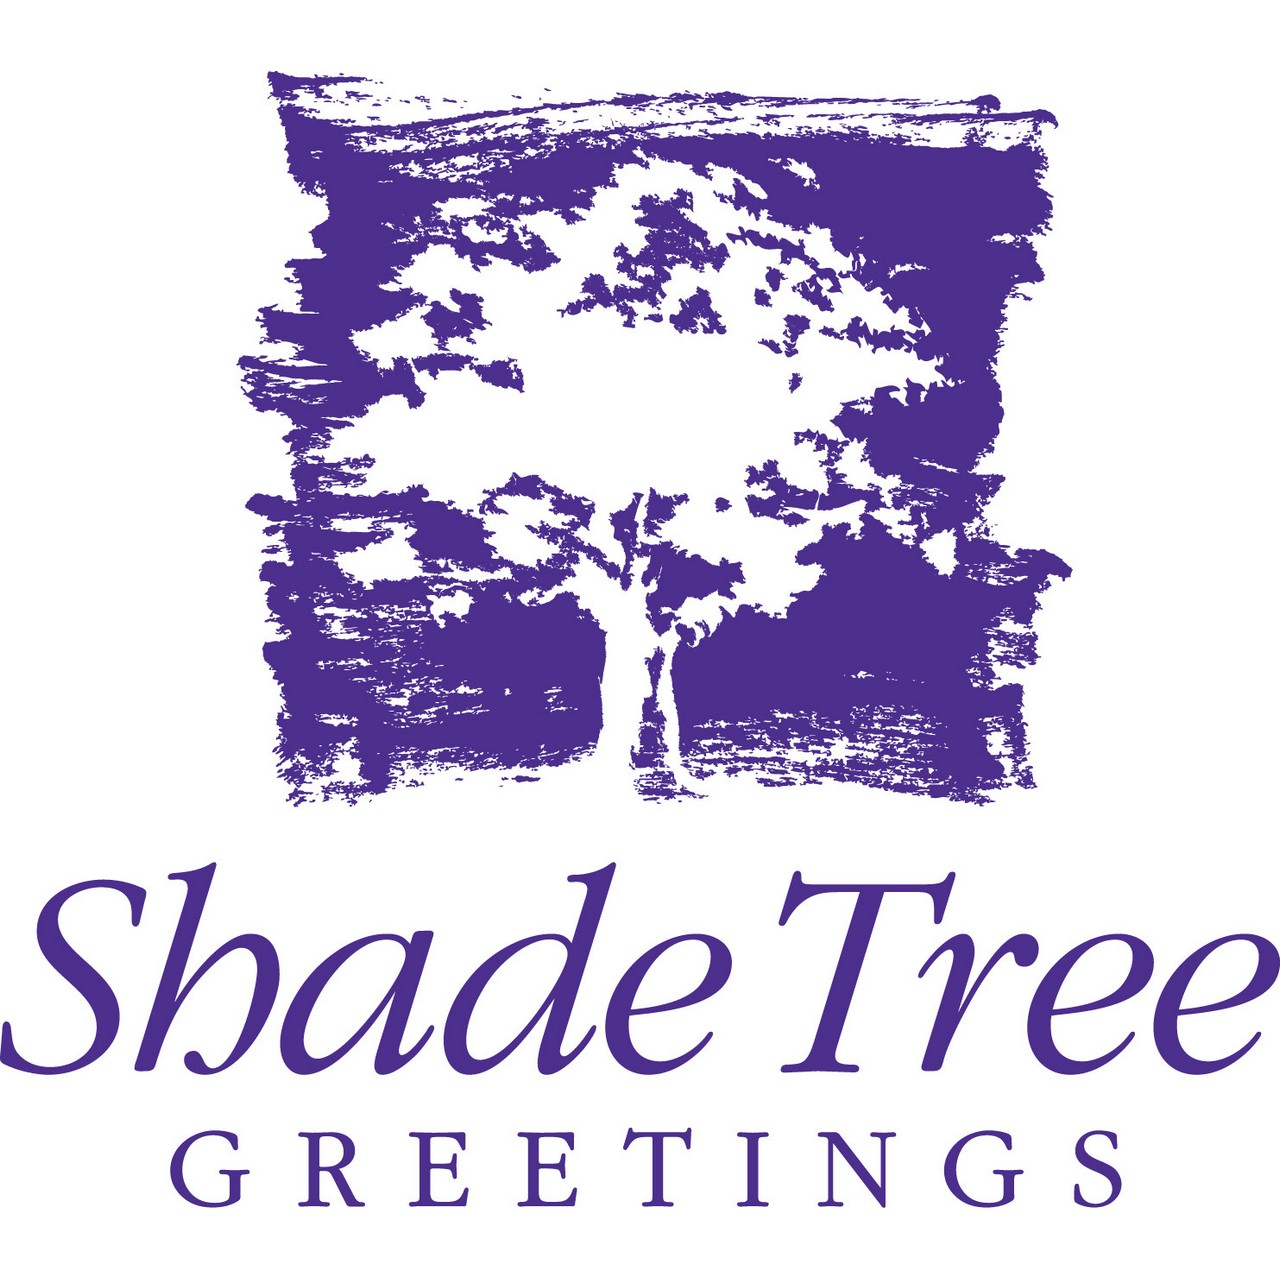 Shade Tree Greetings Products - The Nut House